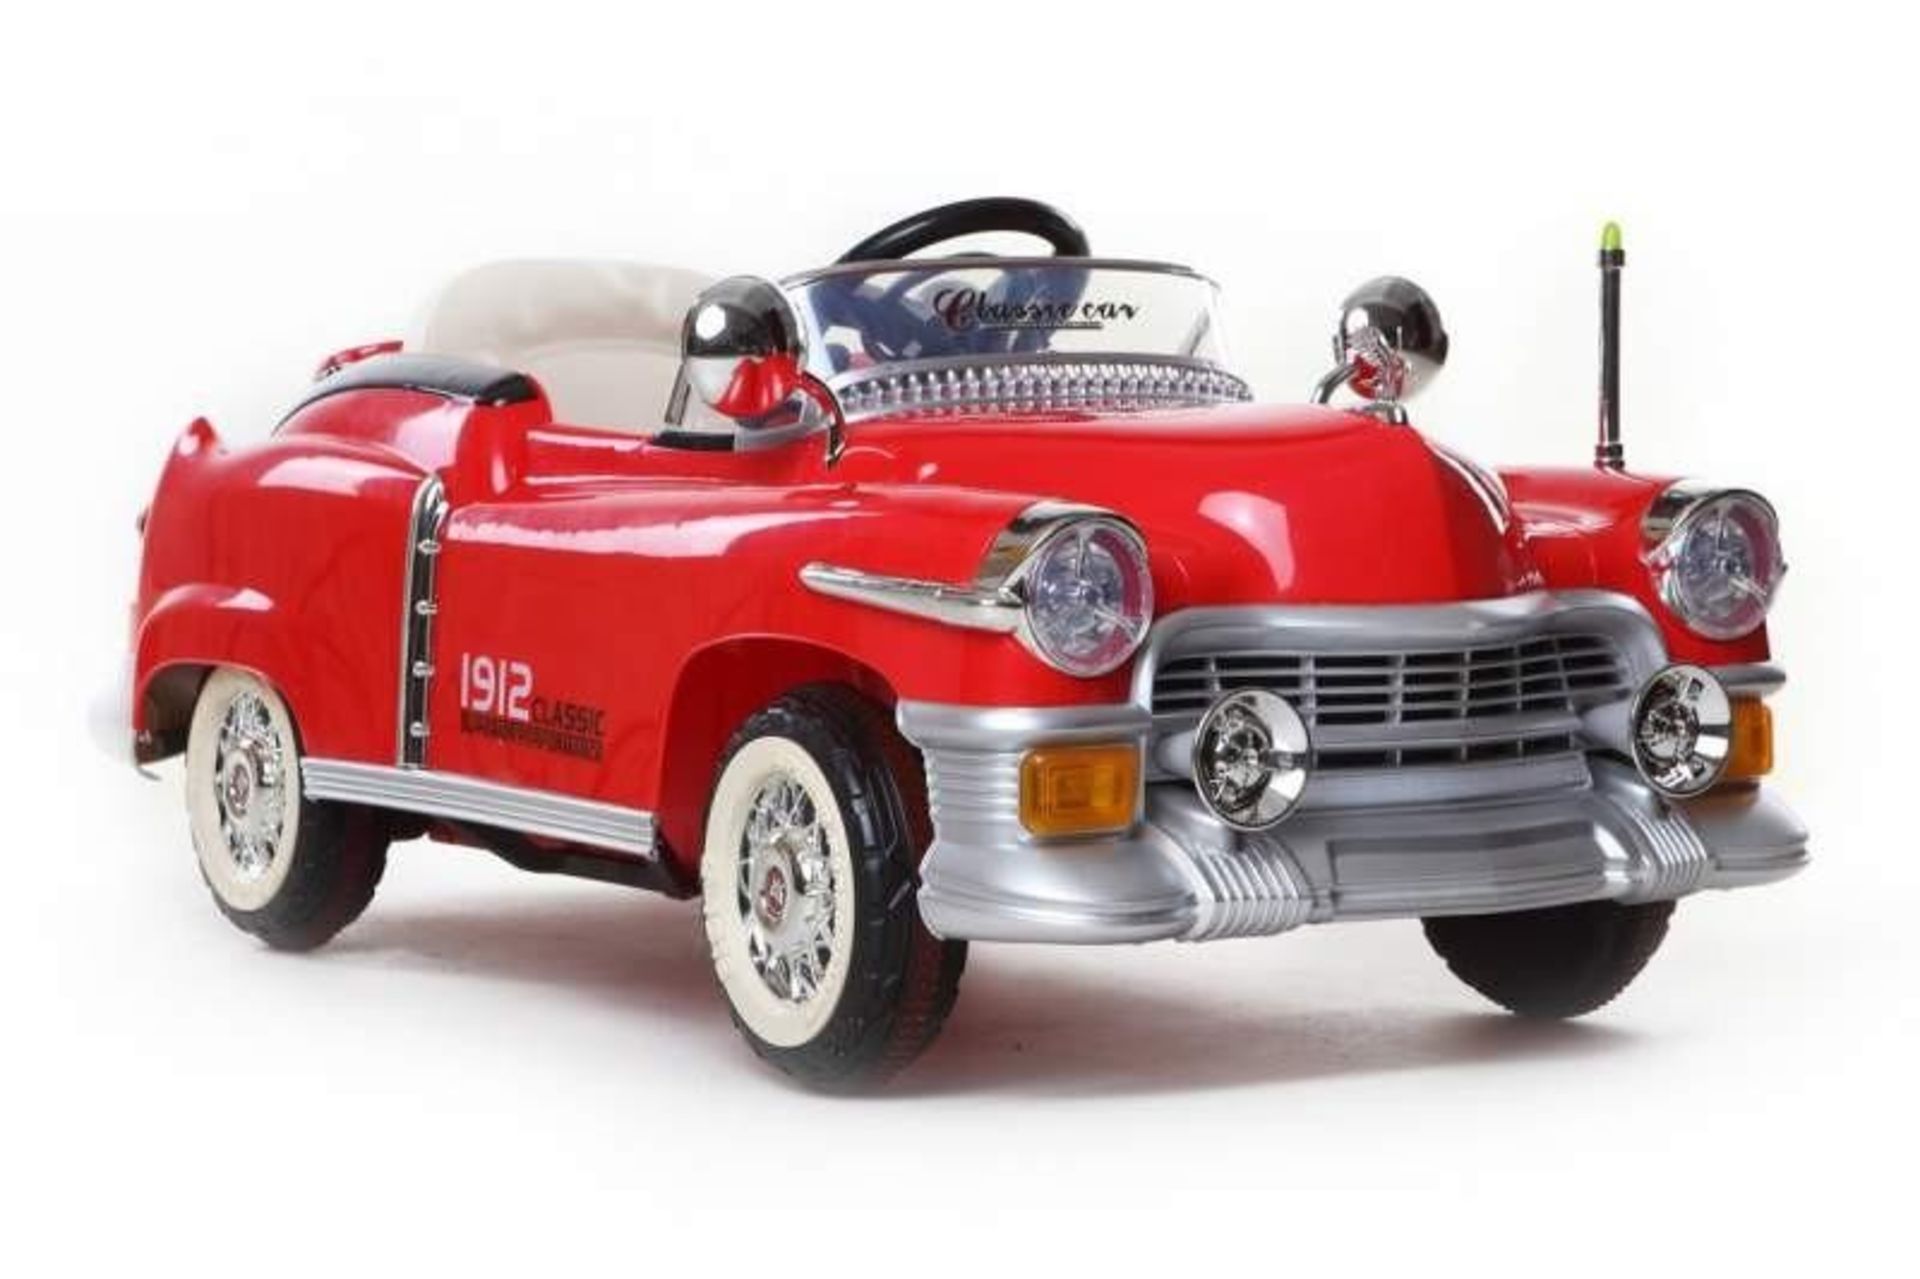 V Brand New 12v Classic 1950's Retro American Style Ride On Electric Car For Kids - Parental